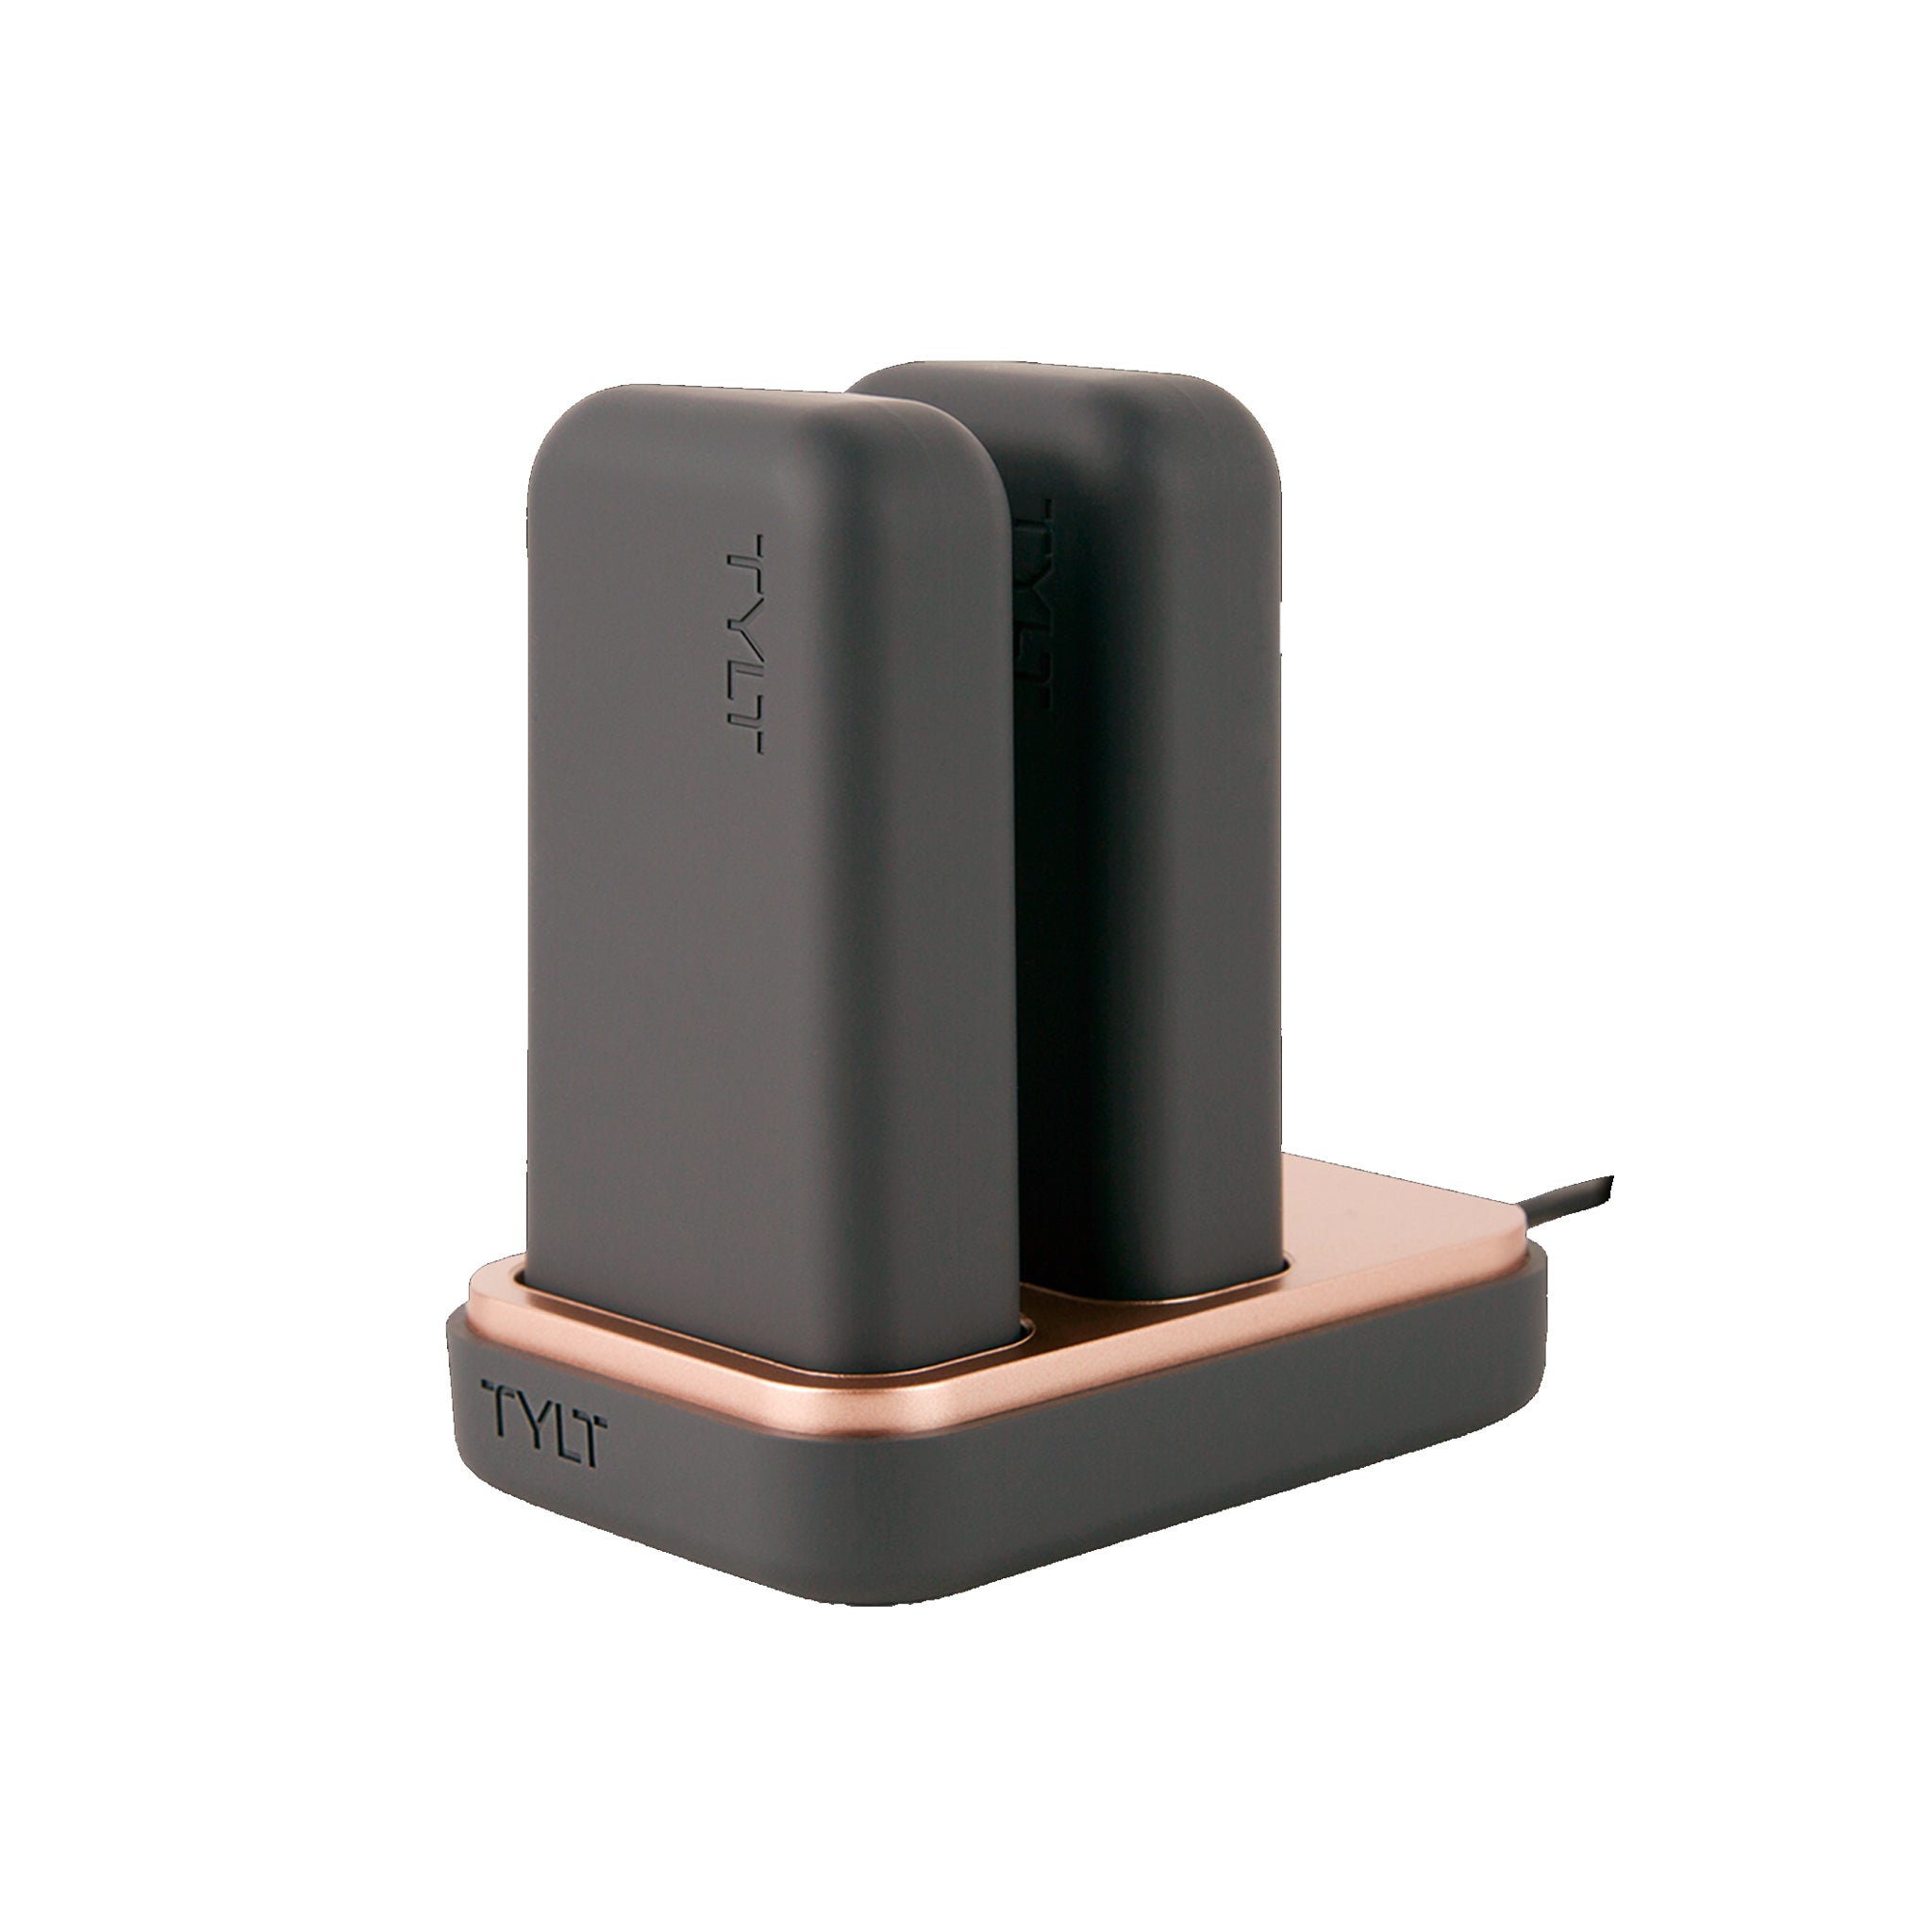 Tylt - Dockit Charging Station And Power Banks 6,700 Mah - Black